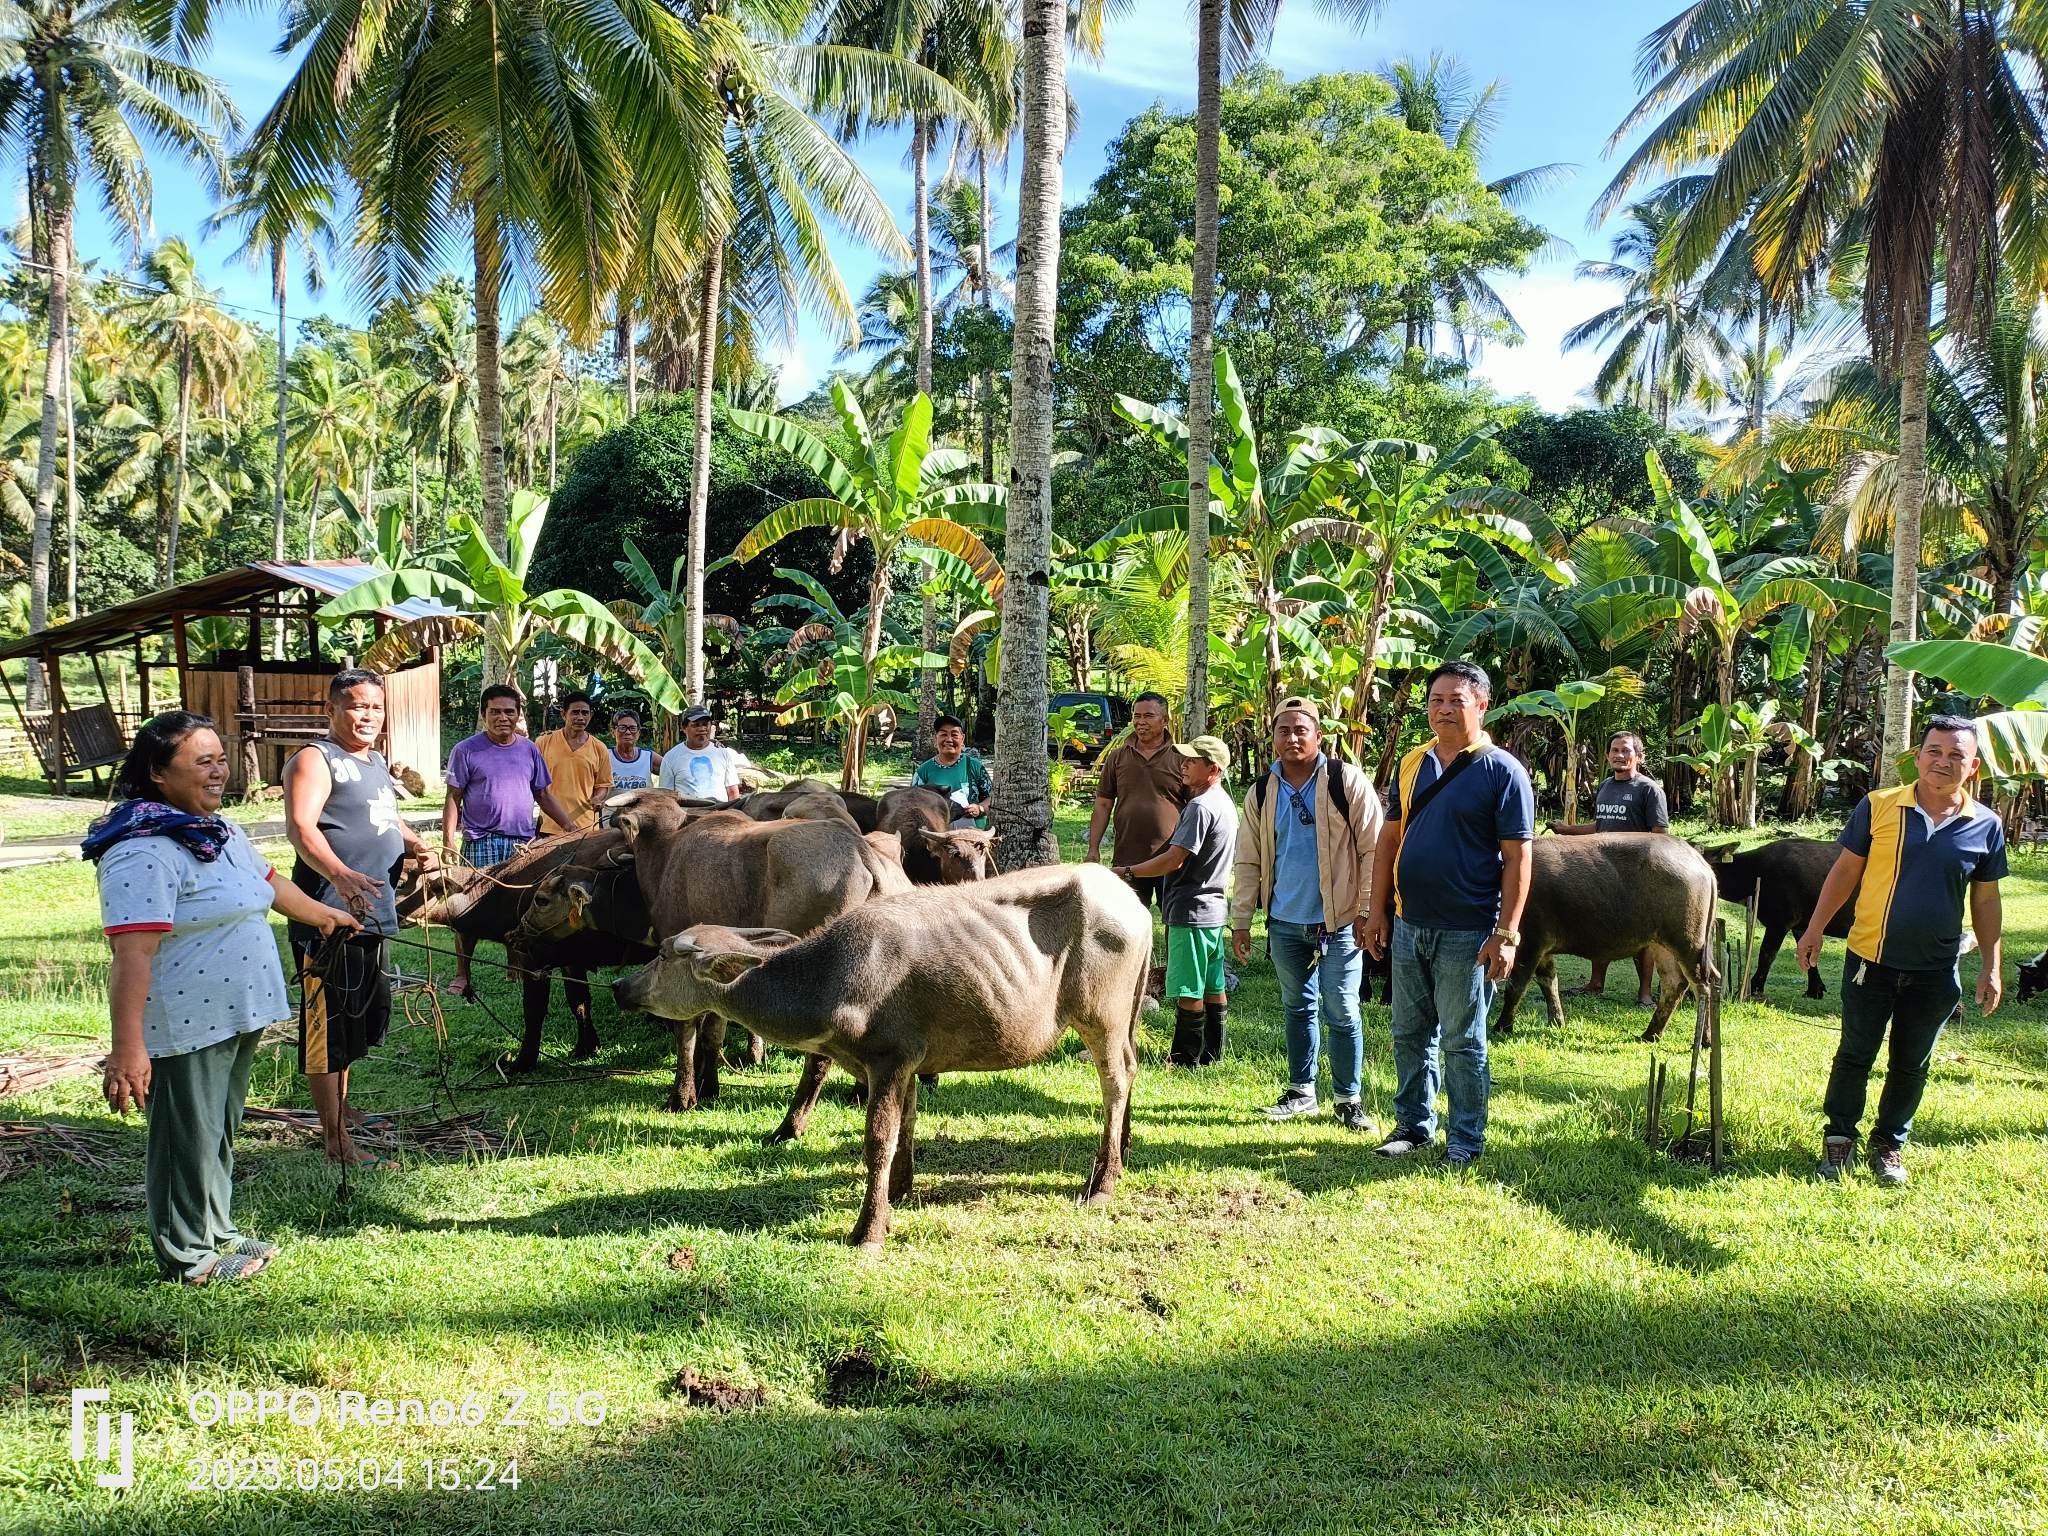 25 farmers in Zamboanga del Sur received Carabao Dairy Production Project